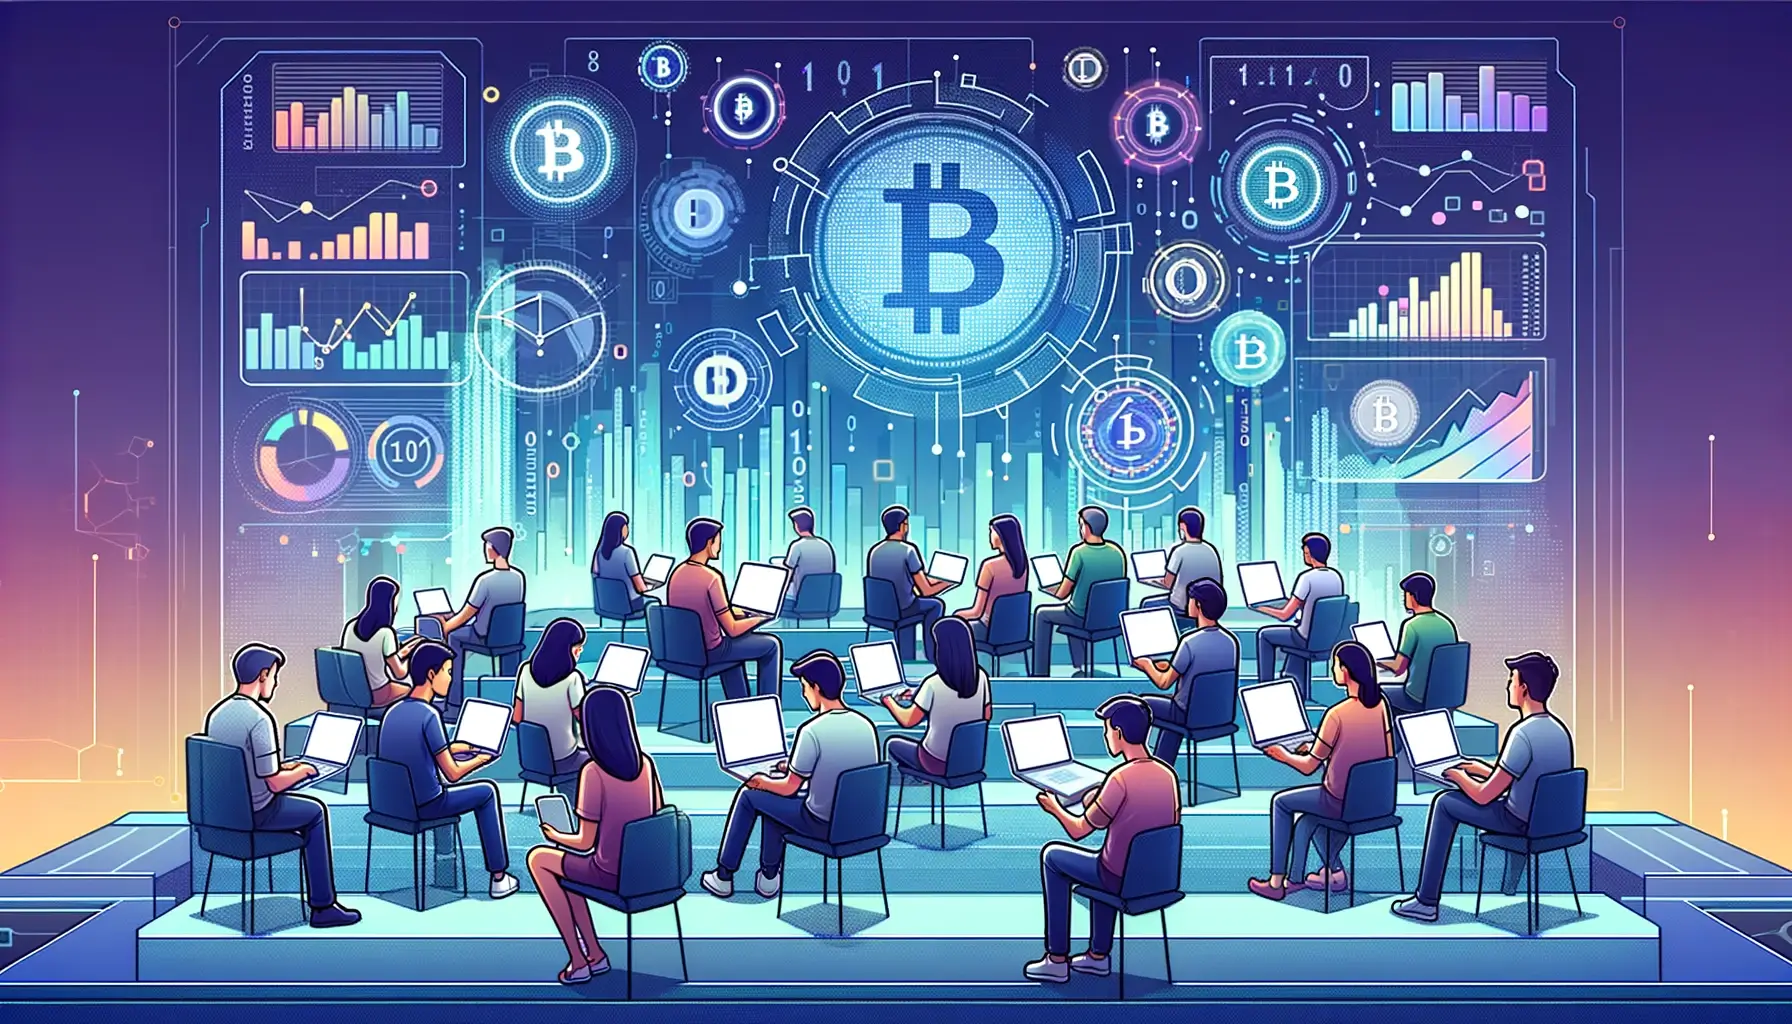 Dynamic digital landscape banner for cryptocurrency blog, featuring a diverse group of people learning on laptops and tablets with generic financial graphs